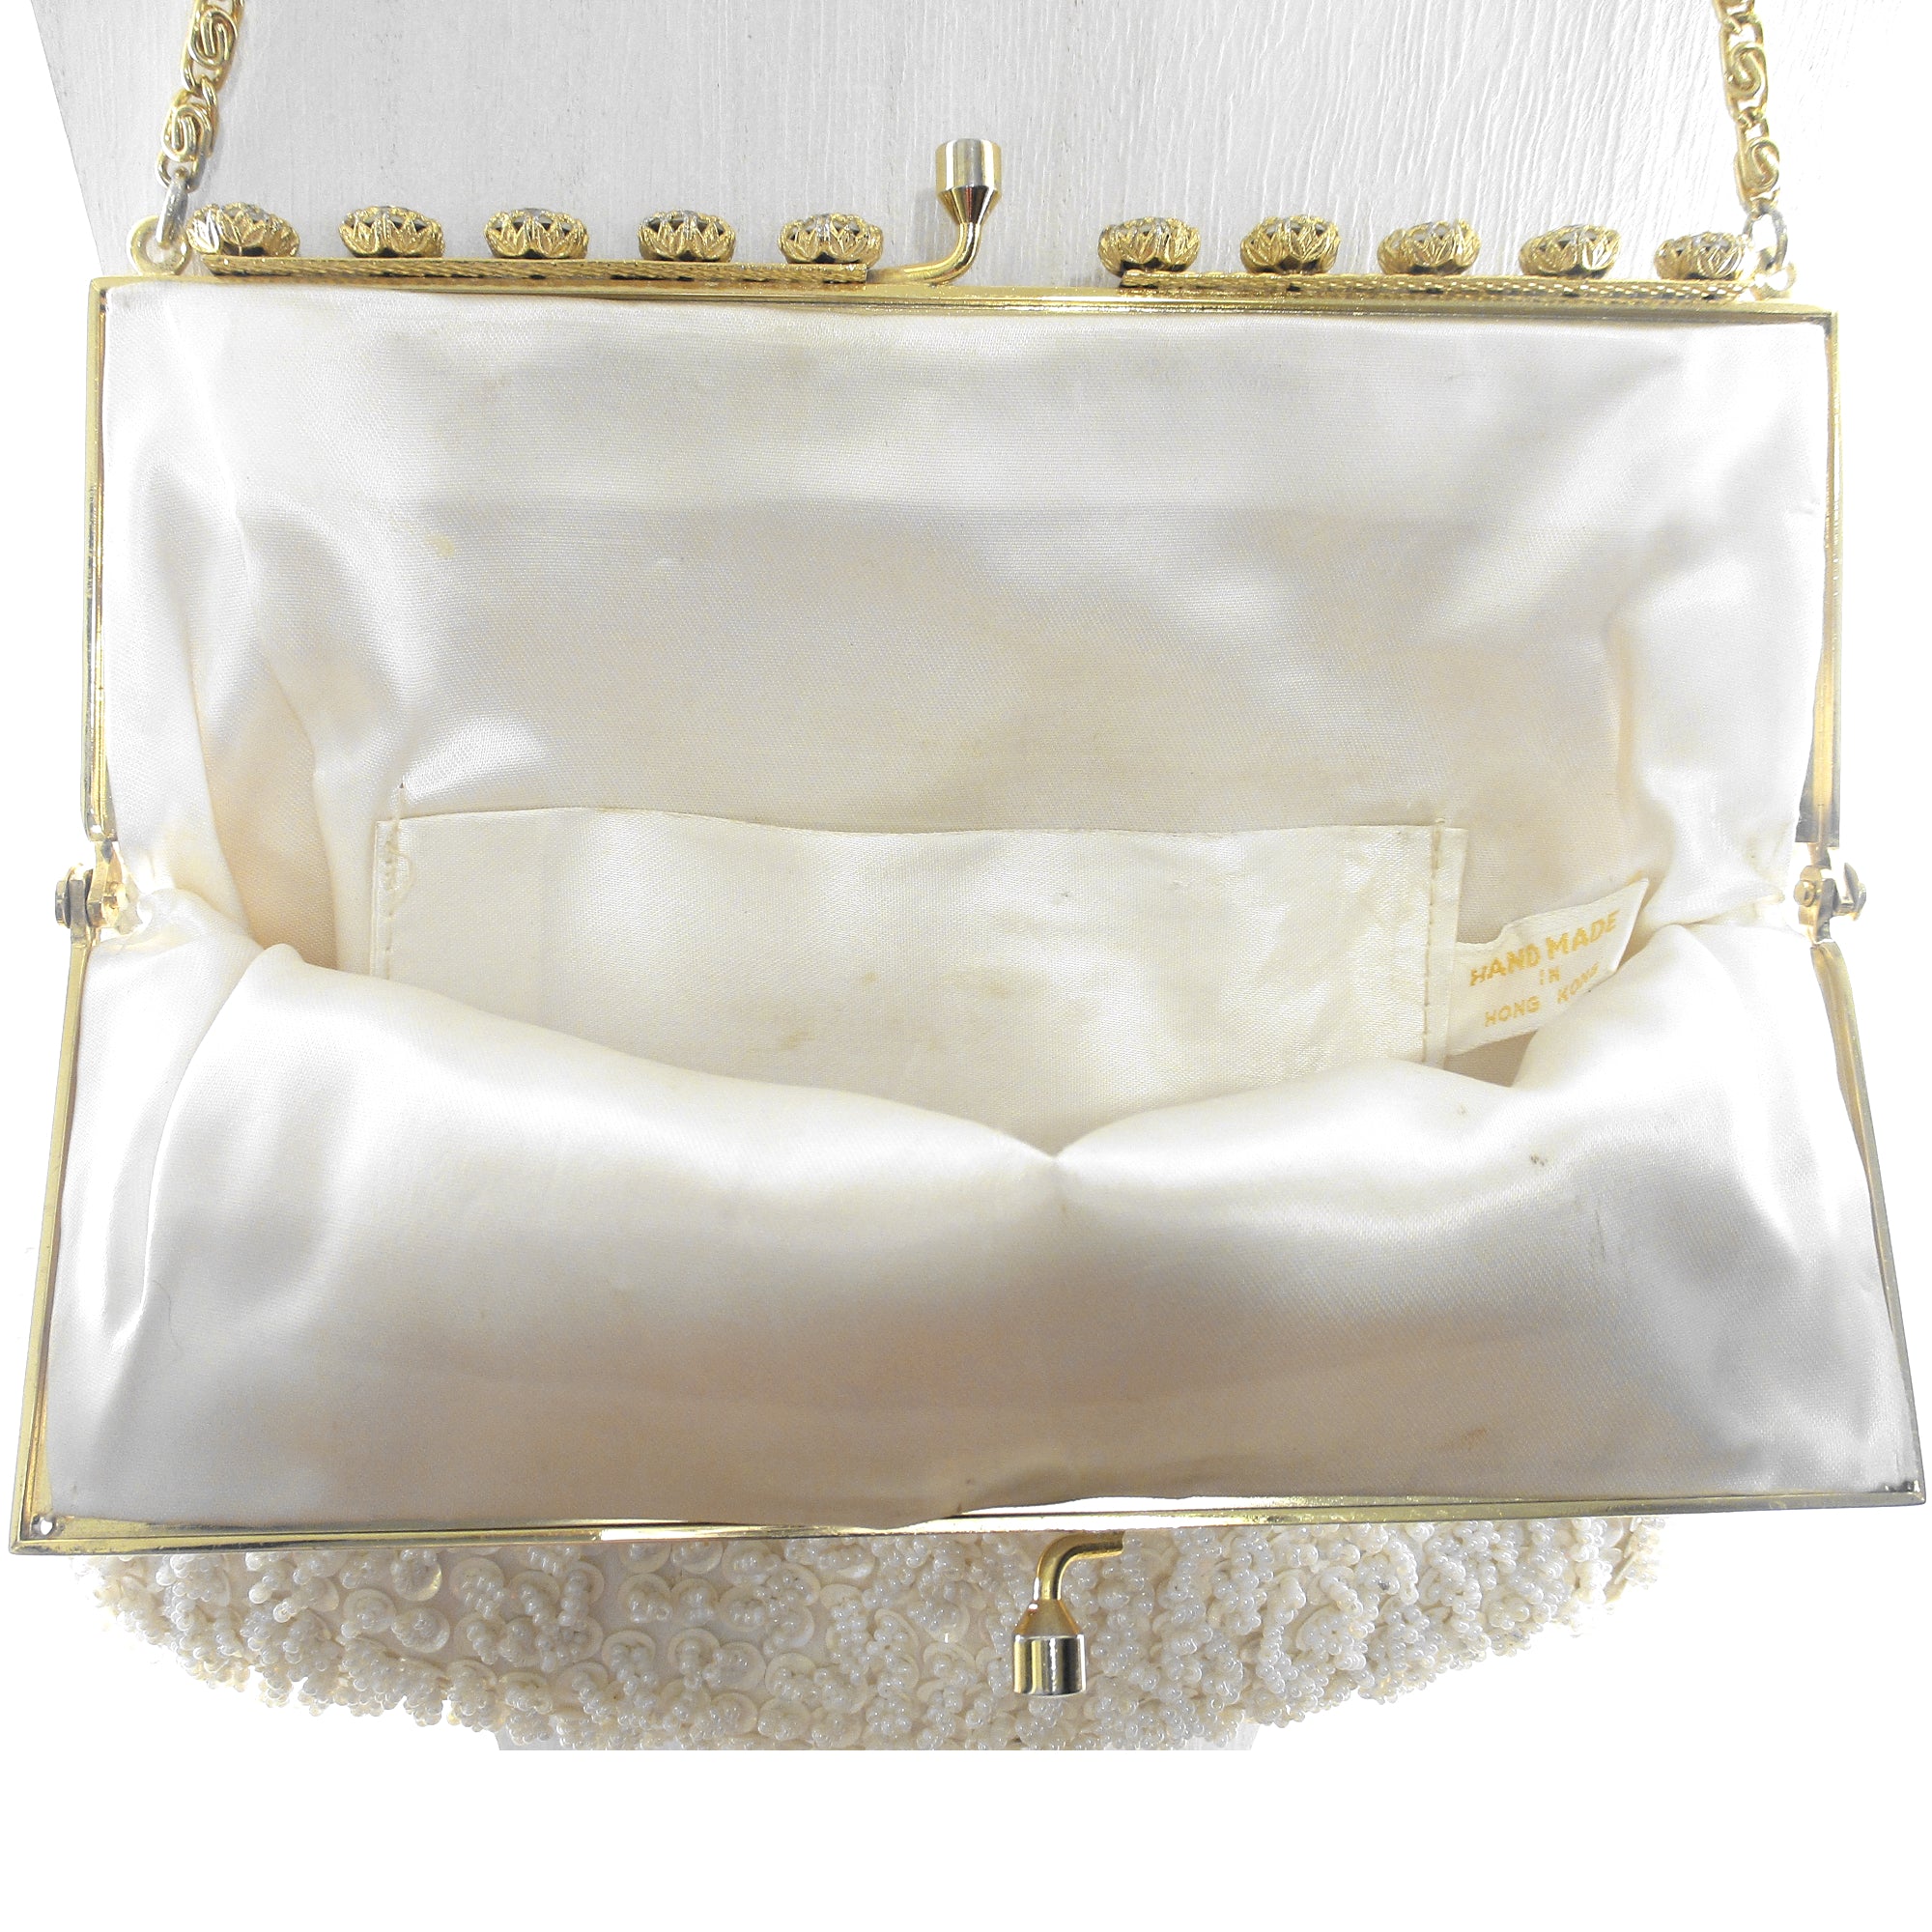 Vintage Walborg White Beaded Evening Clutch Bag, Hand Made in Japan, Gold  Chain